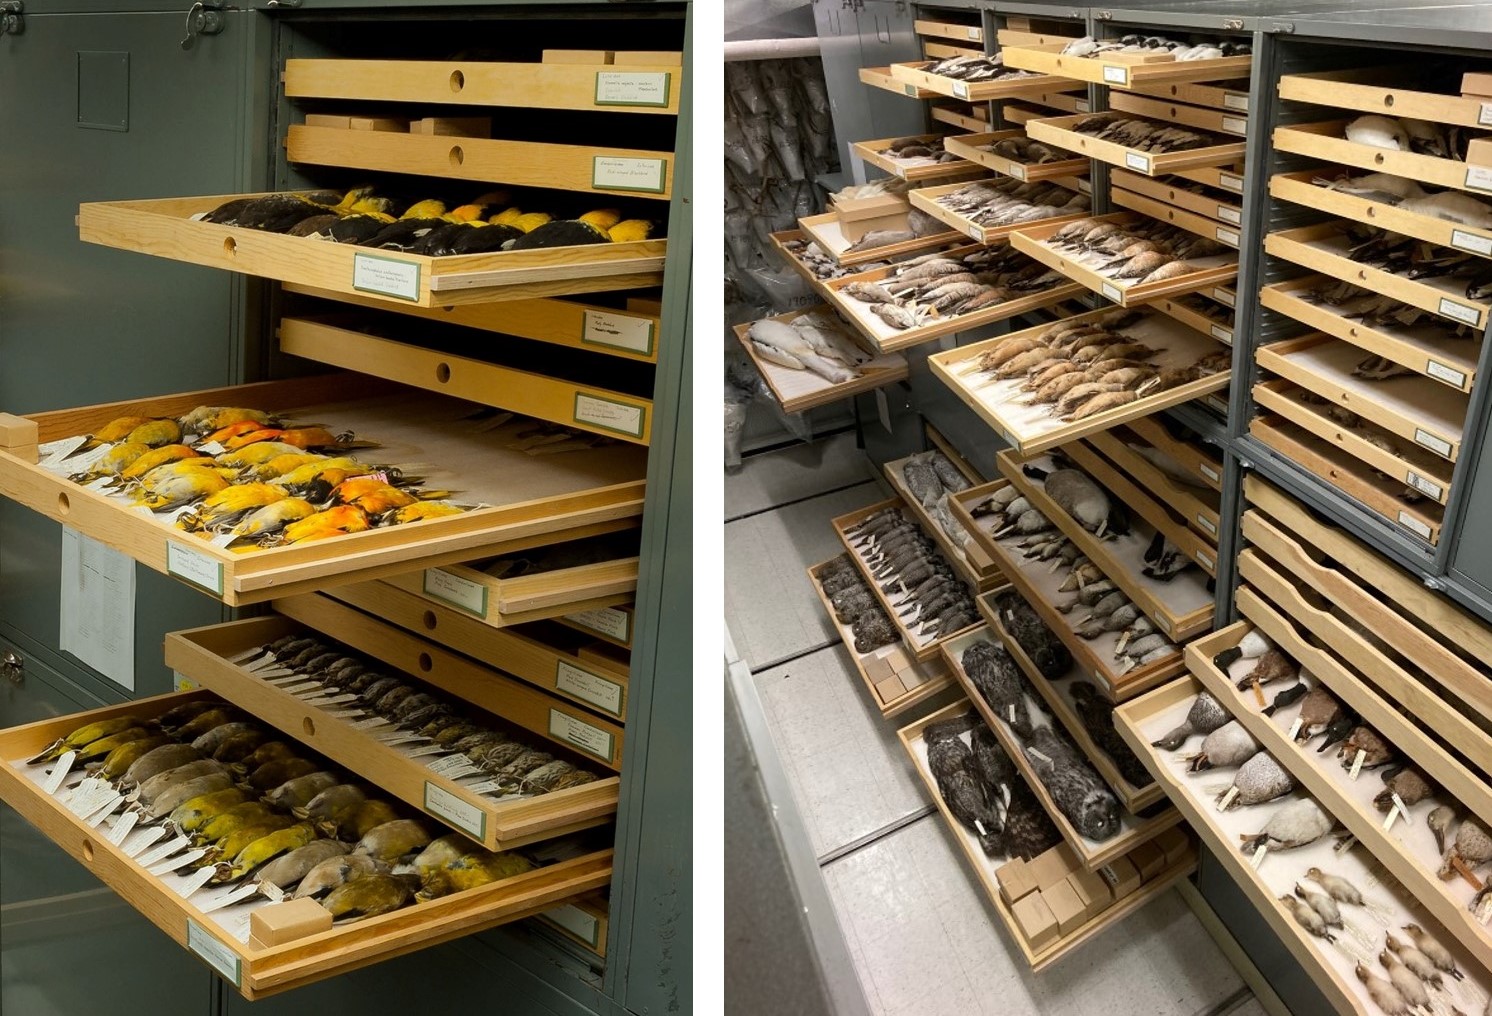 Two photographs side-by-side. The left photo shows an open cabinet with a number of wooden drawers, three of which are pulled open revealing yellow and black bird specimens. The right photo shows several open cabinets with numerous drawers open, showing large and small bird specimens of many species.